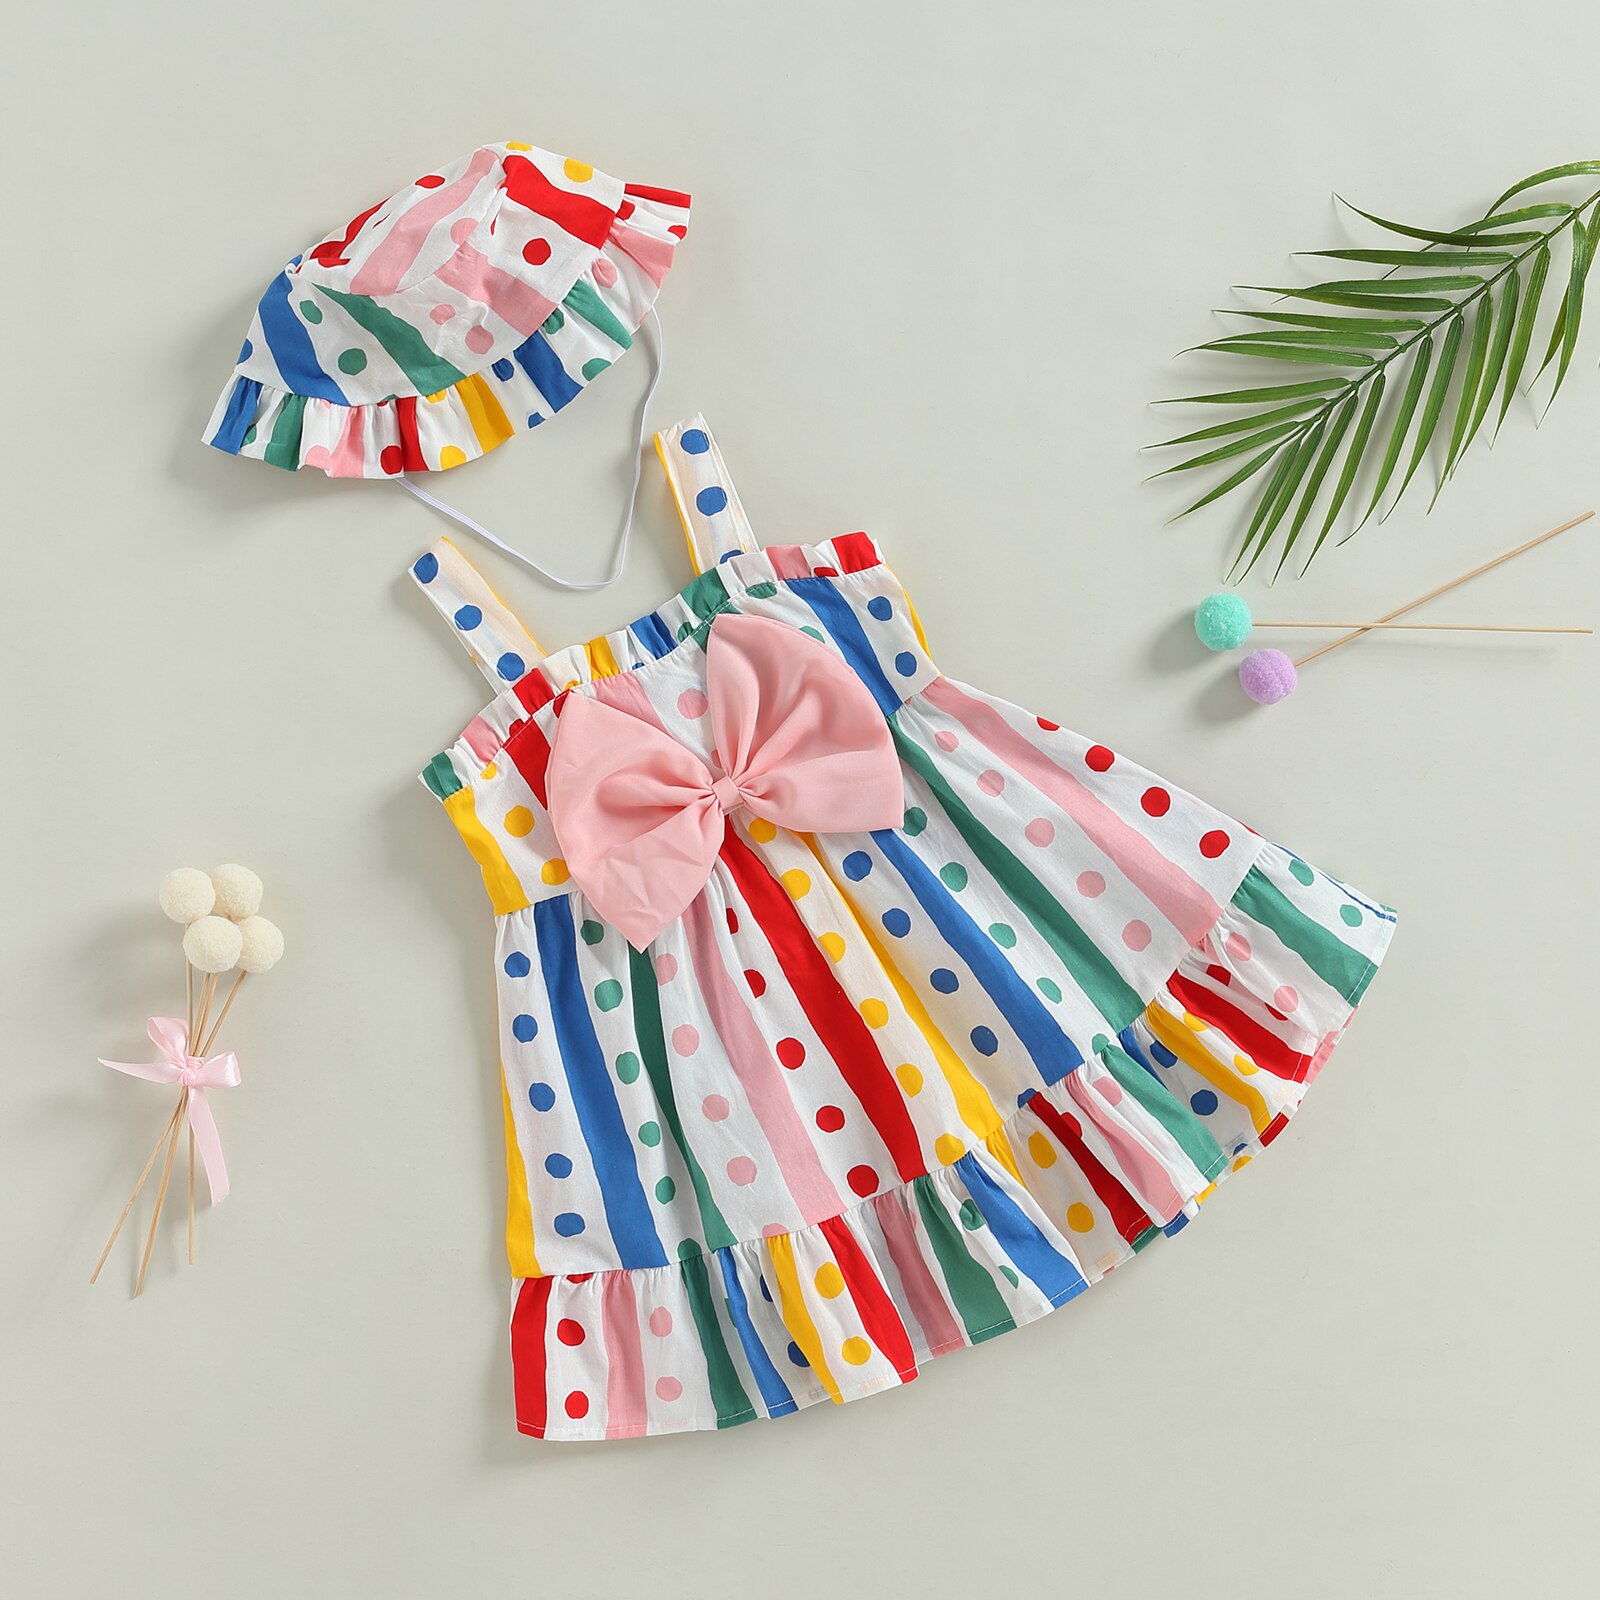 Pudcoco-Infant-Baby-Girl-Slip-Colorful-Dress-Set-Sleeveless-Striped-Dots-Print-Bowknot-A-line-Dress-1